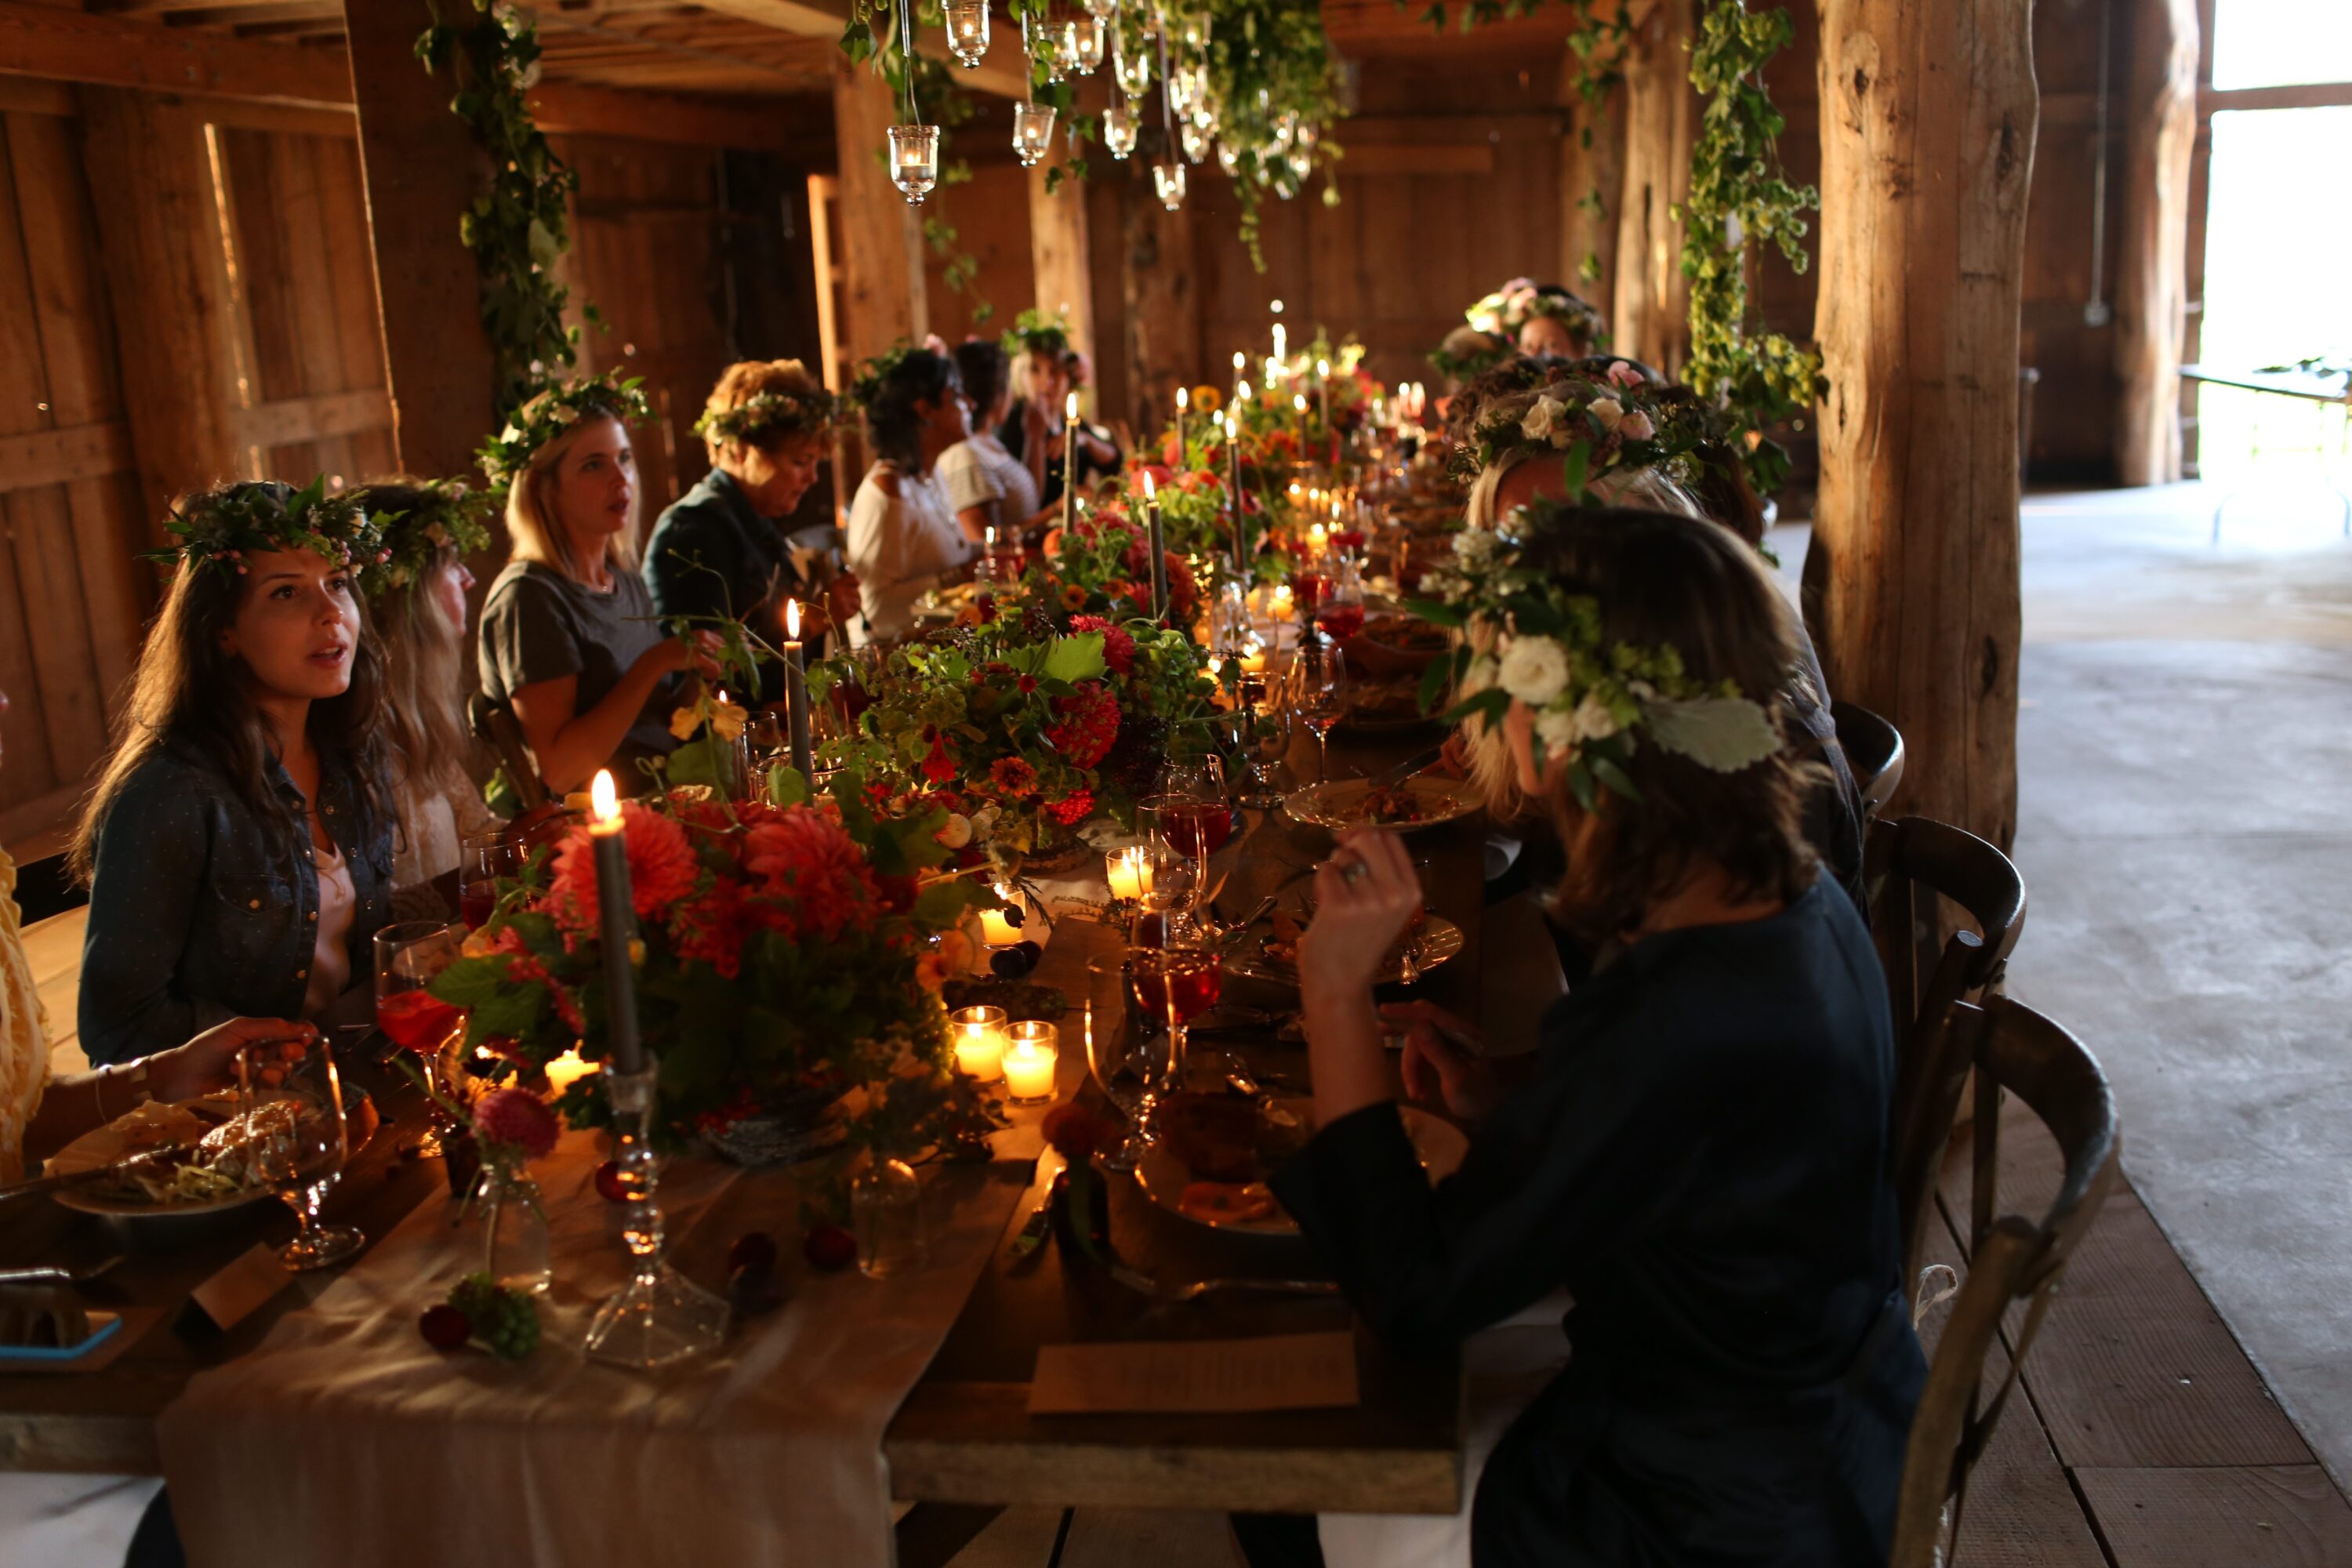 People dining at a table decorated with flowers